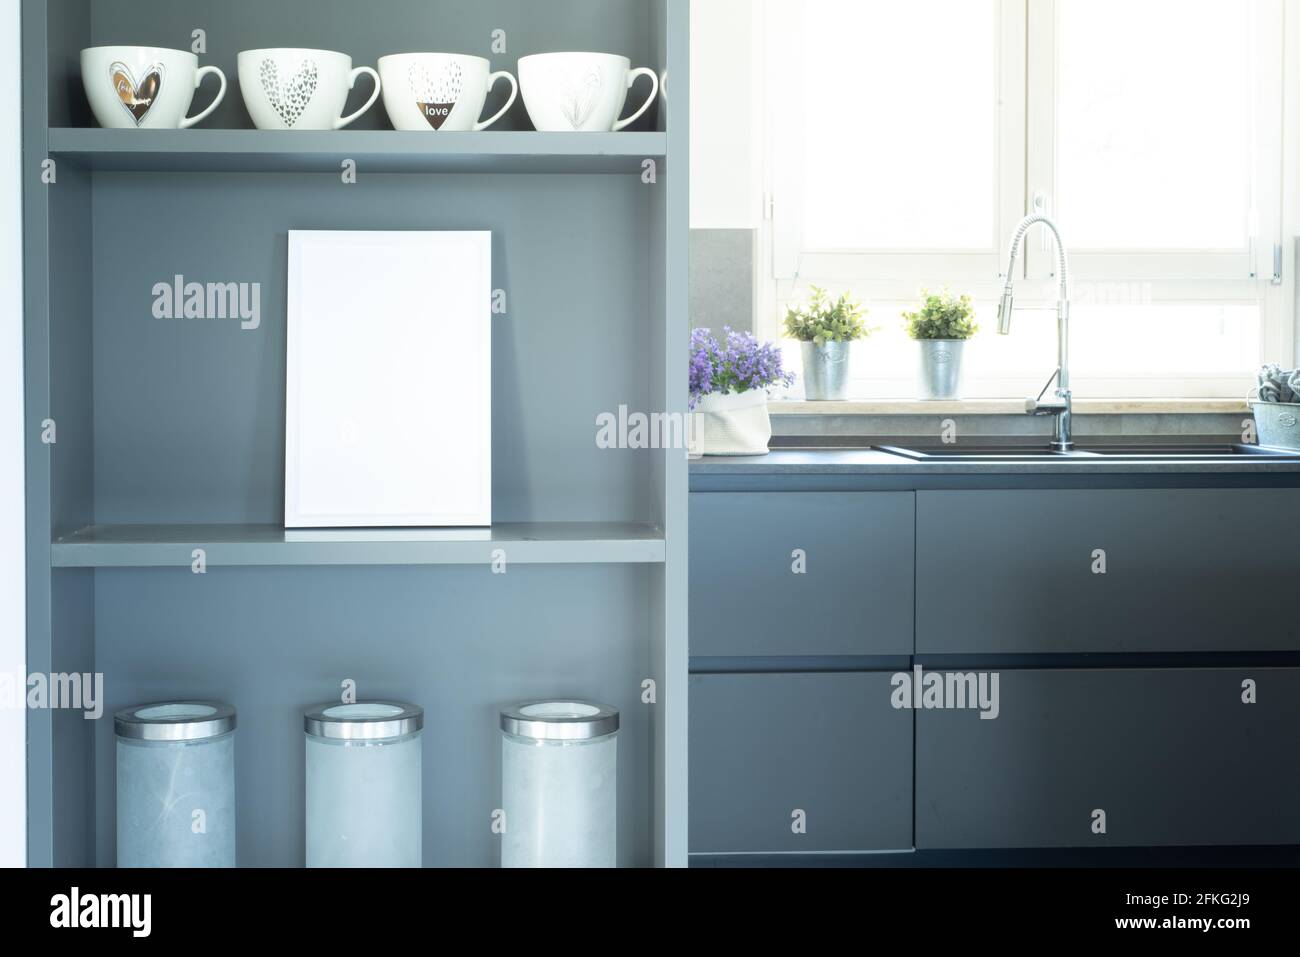 Elegant and cozy gray kitchen. Blank white frame mockup on the furniture shelf in the foreground. Modern interior illuminated by natural light from th Stock Photo